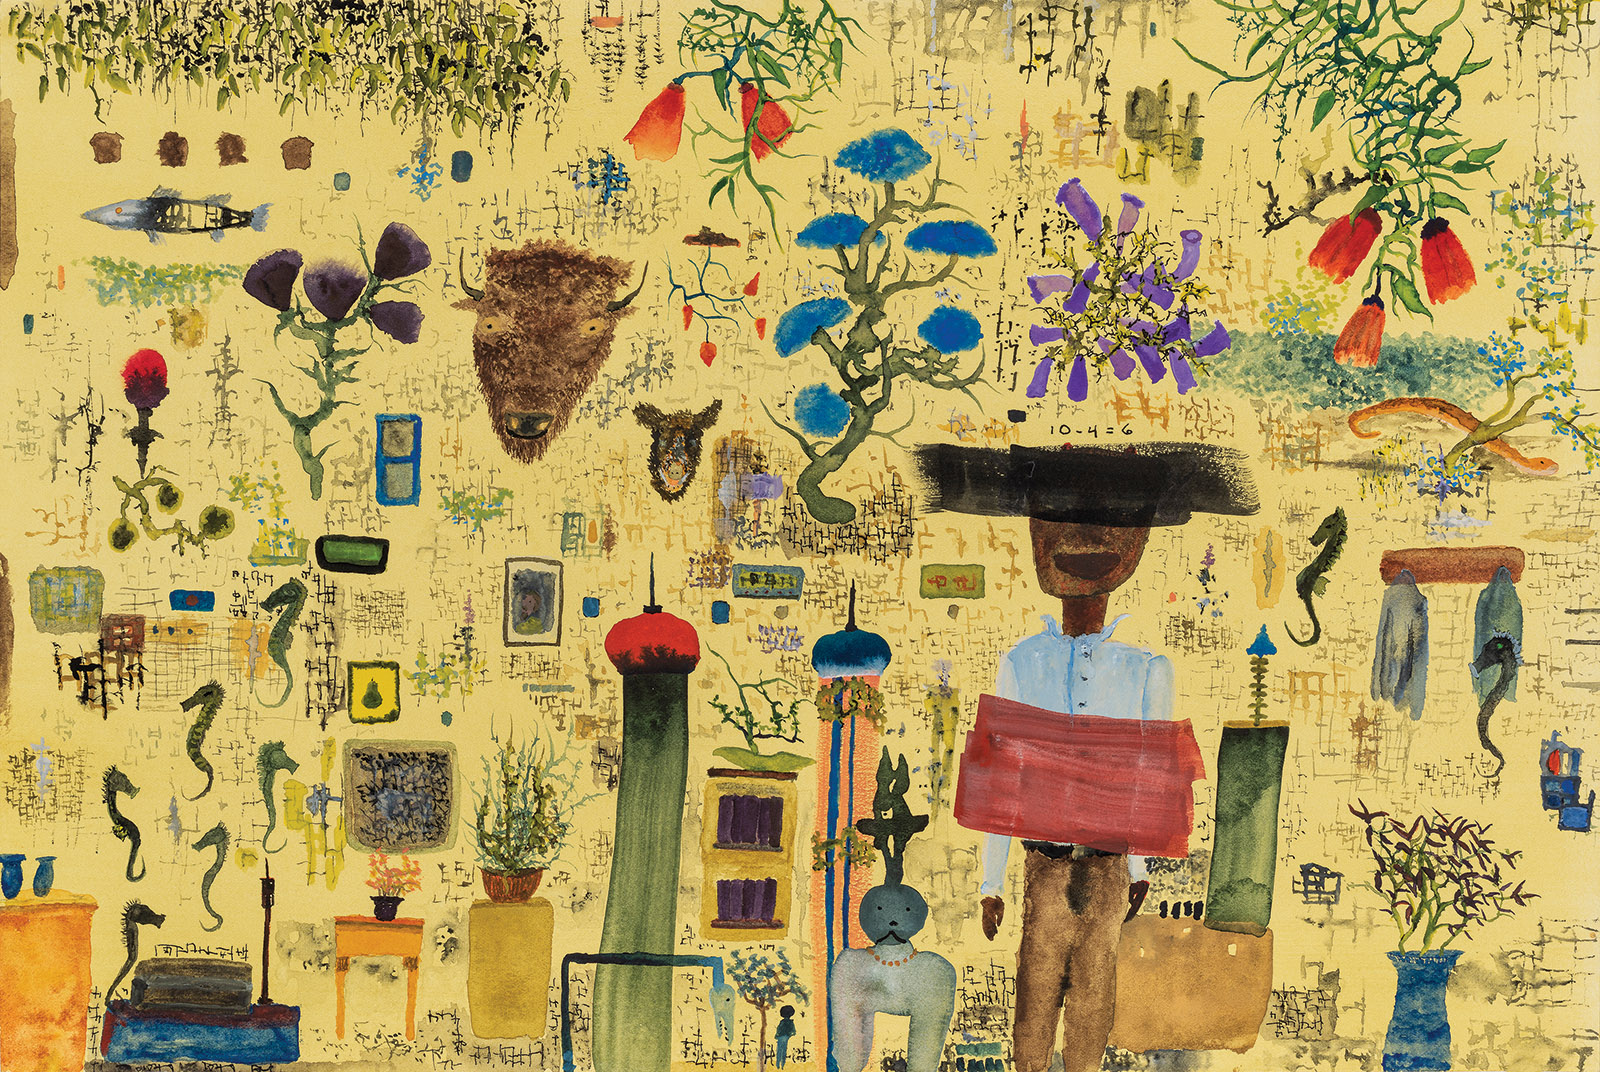 He was strange and so was his apartment; painting by John Lurie